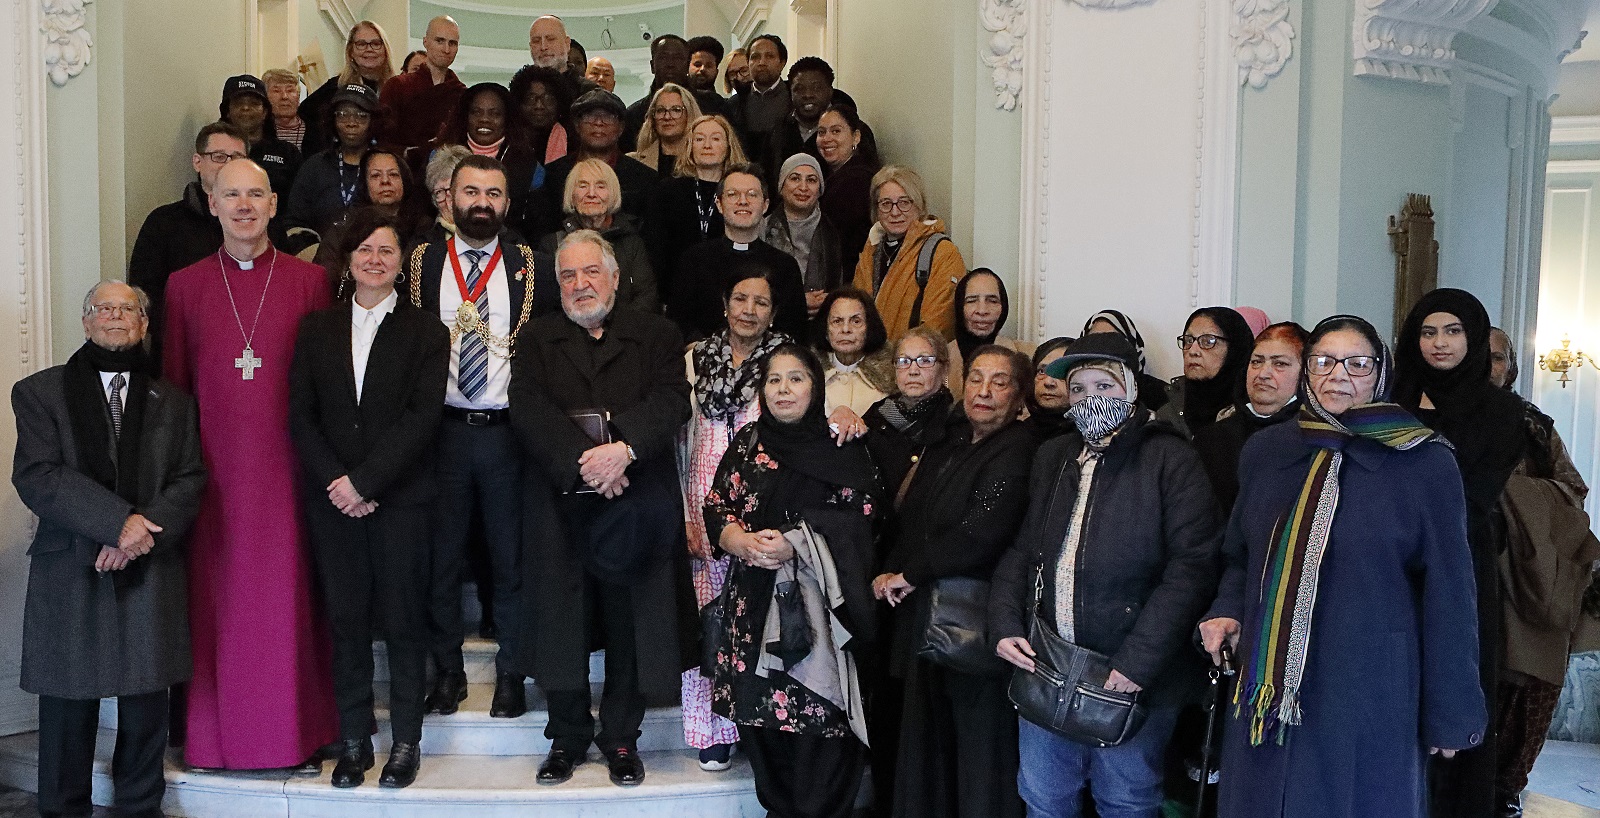 Together in different faiths – Lambeth peace and harmony event